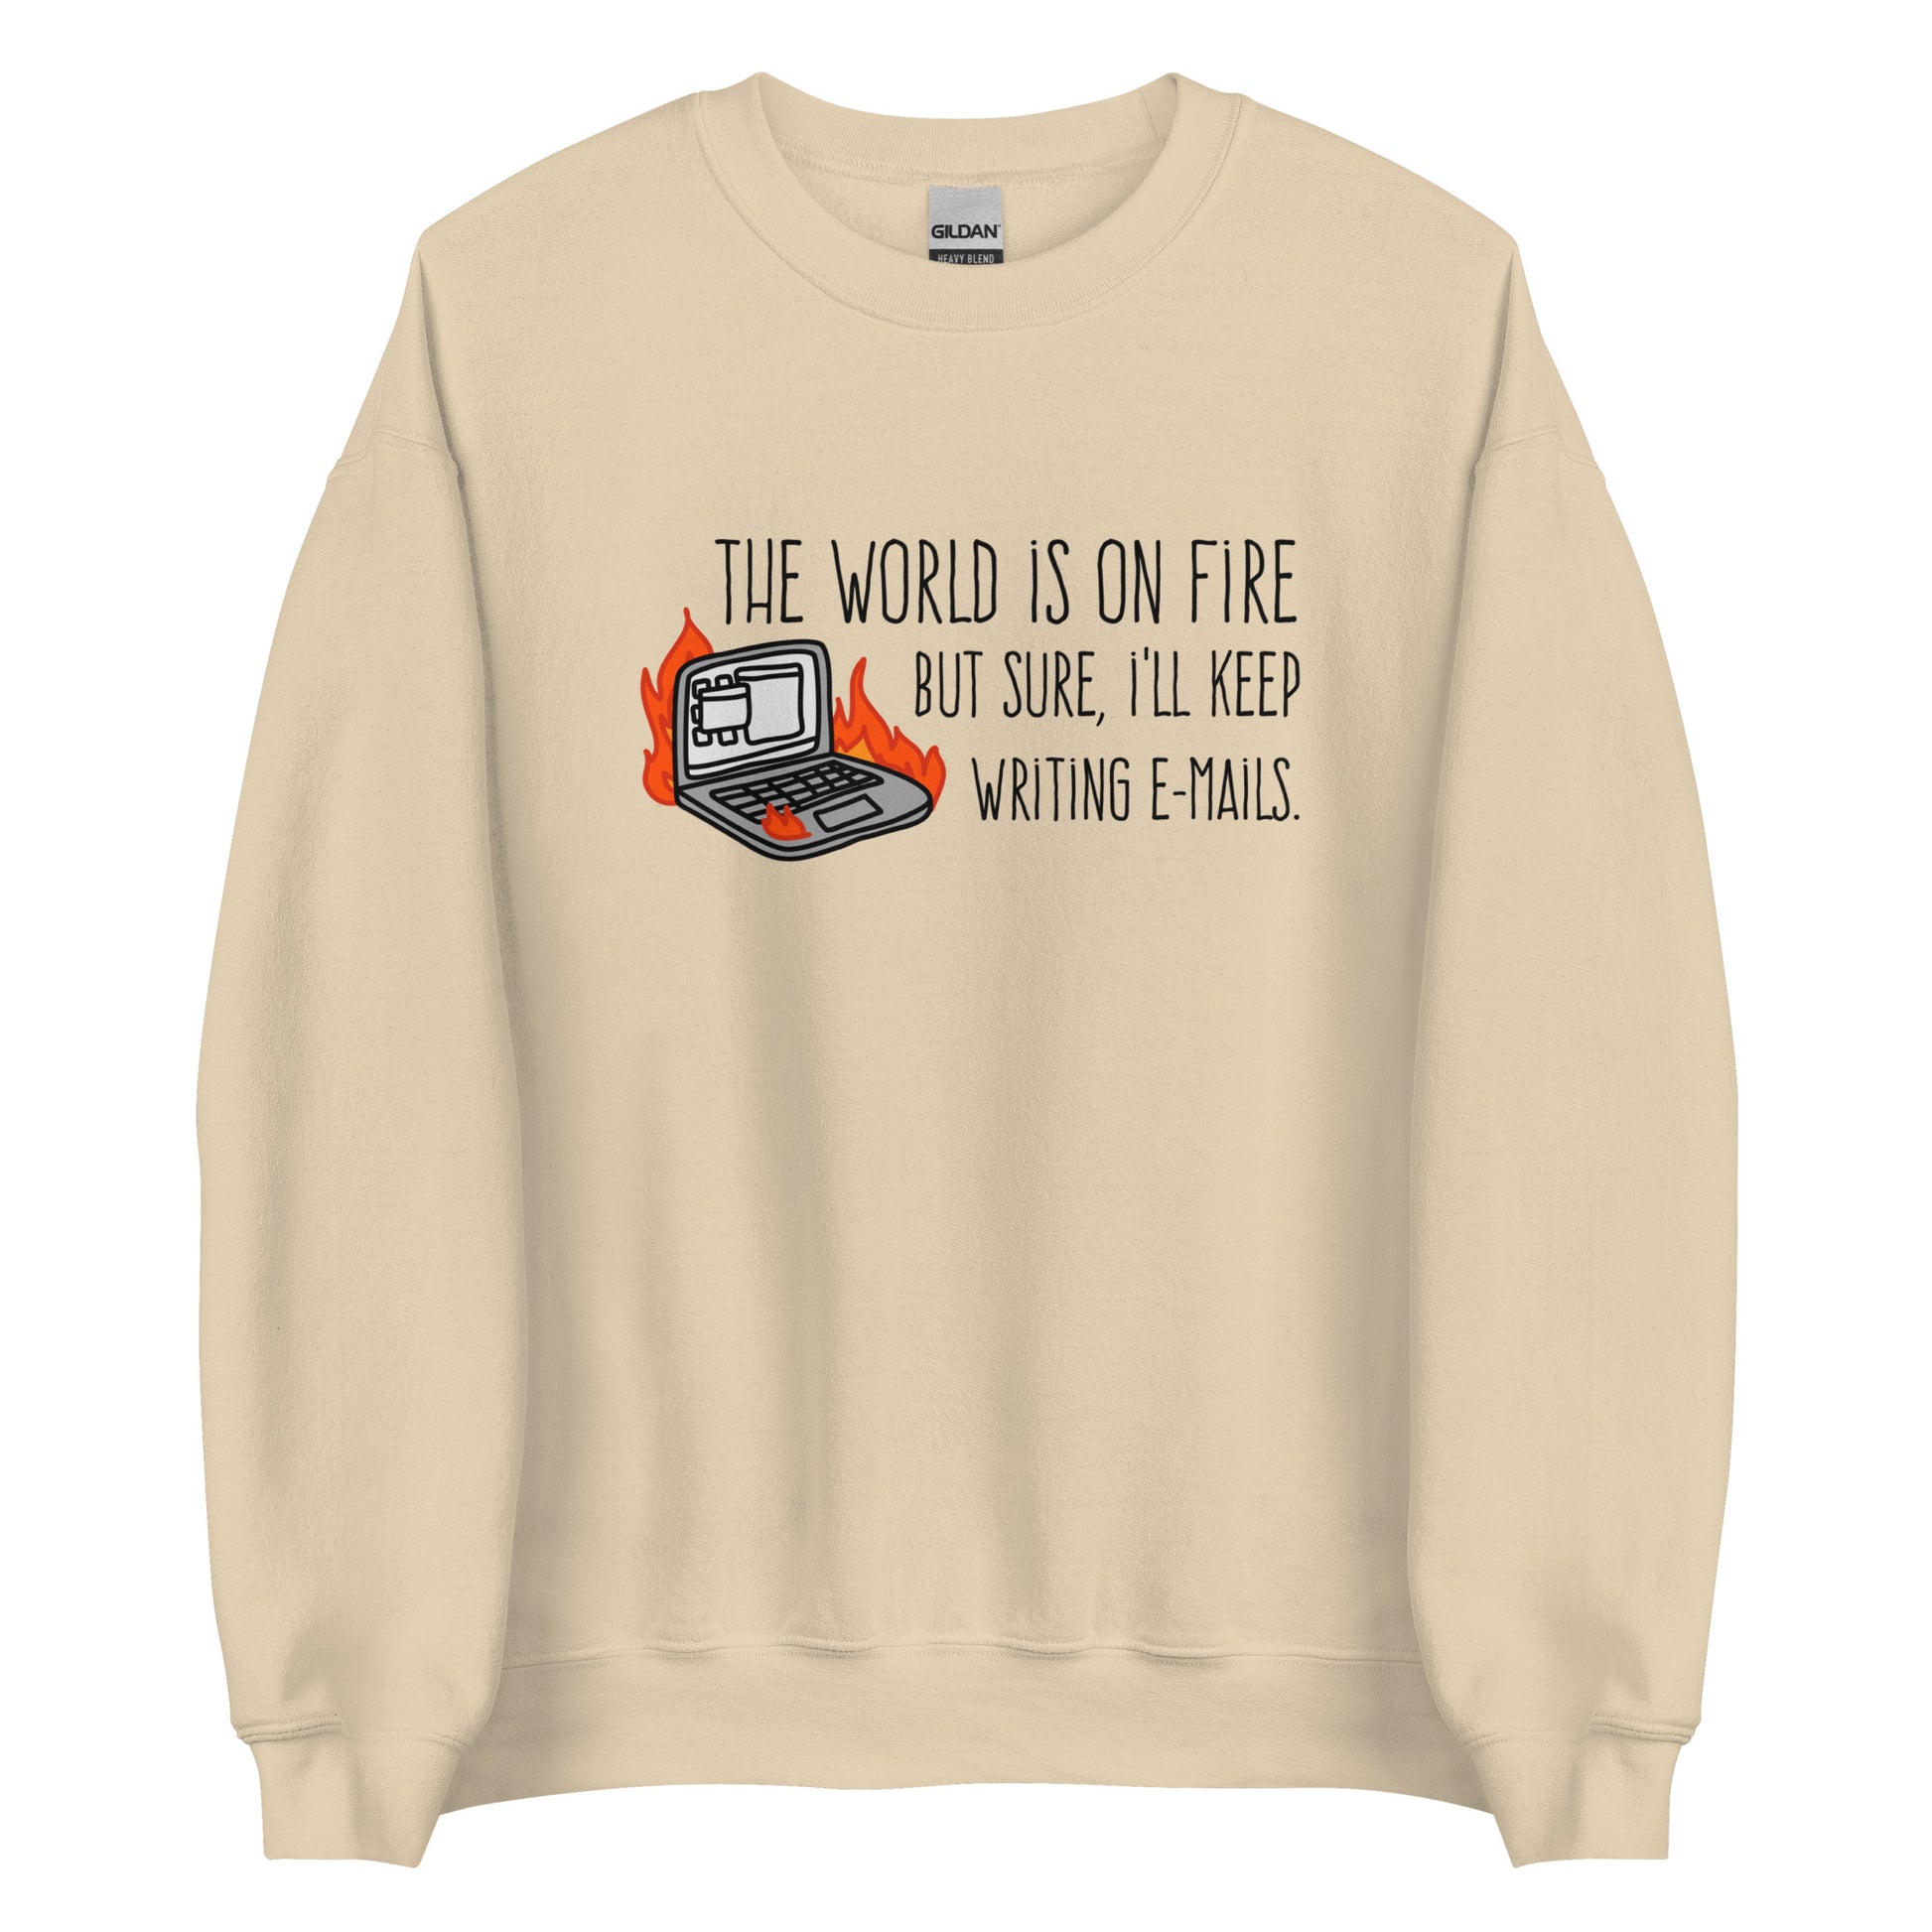 A tan crewneck sweatshirt featuring a squiggly illustration of a laptop that is on fire. Text alongside the laptop reads "the world is on fire but sure, I'll keep writing e-mails."